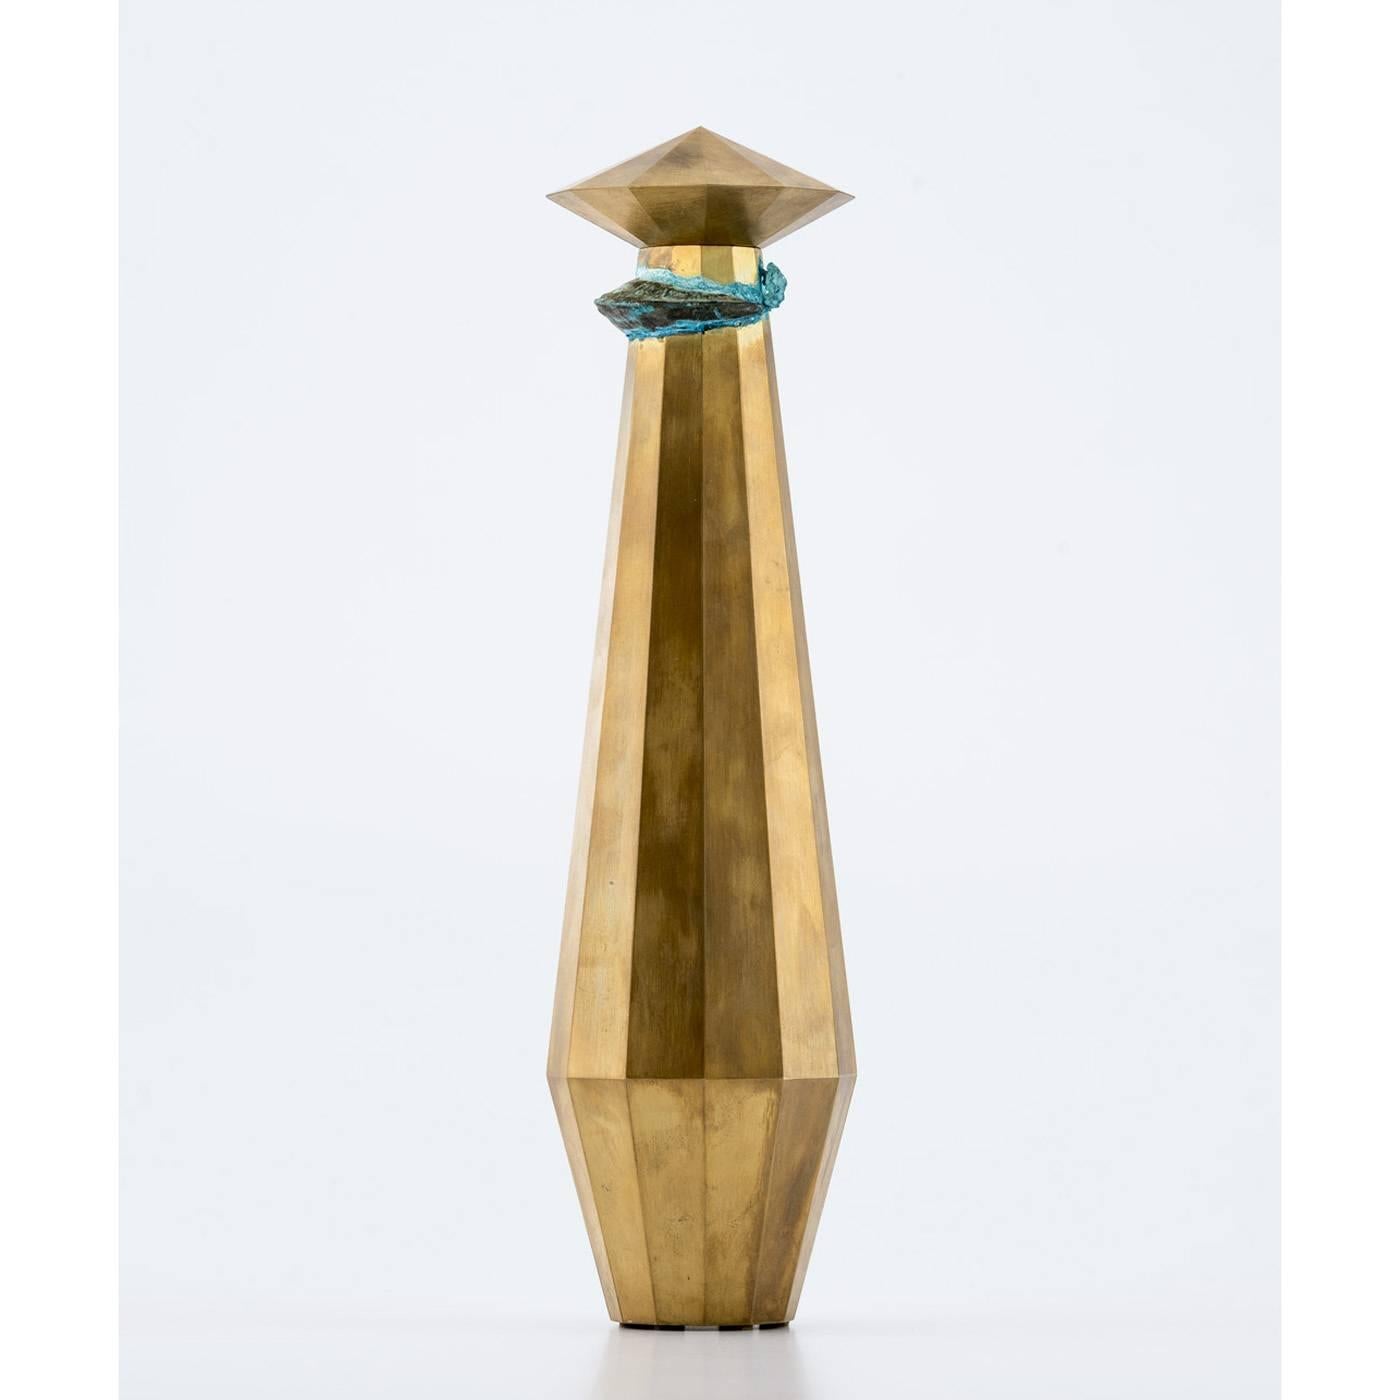 The sharp edges of the hand-oxidized brass plates comprising this vase are shaped to geometric perfection by a CNC milling machine. At the top which tapers, a hand-hammered copper insert is imbedded into it, adorning its the surface. The irregular